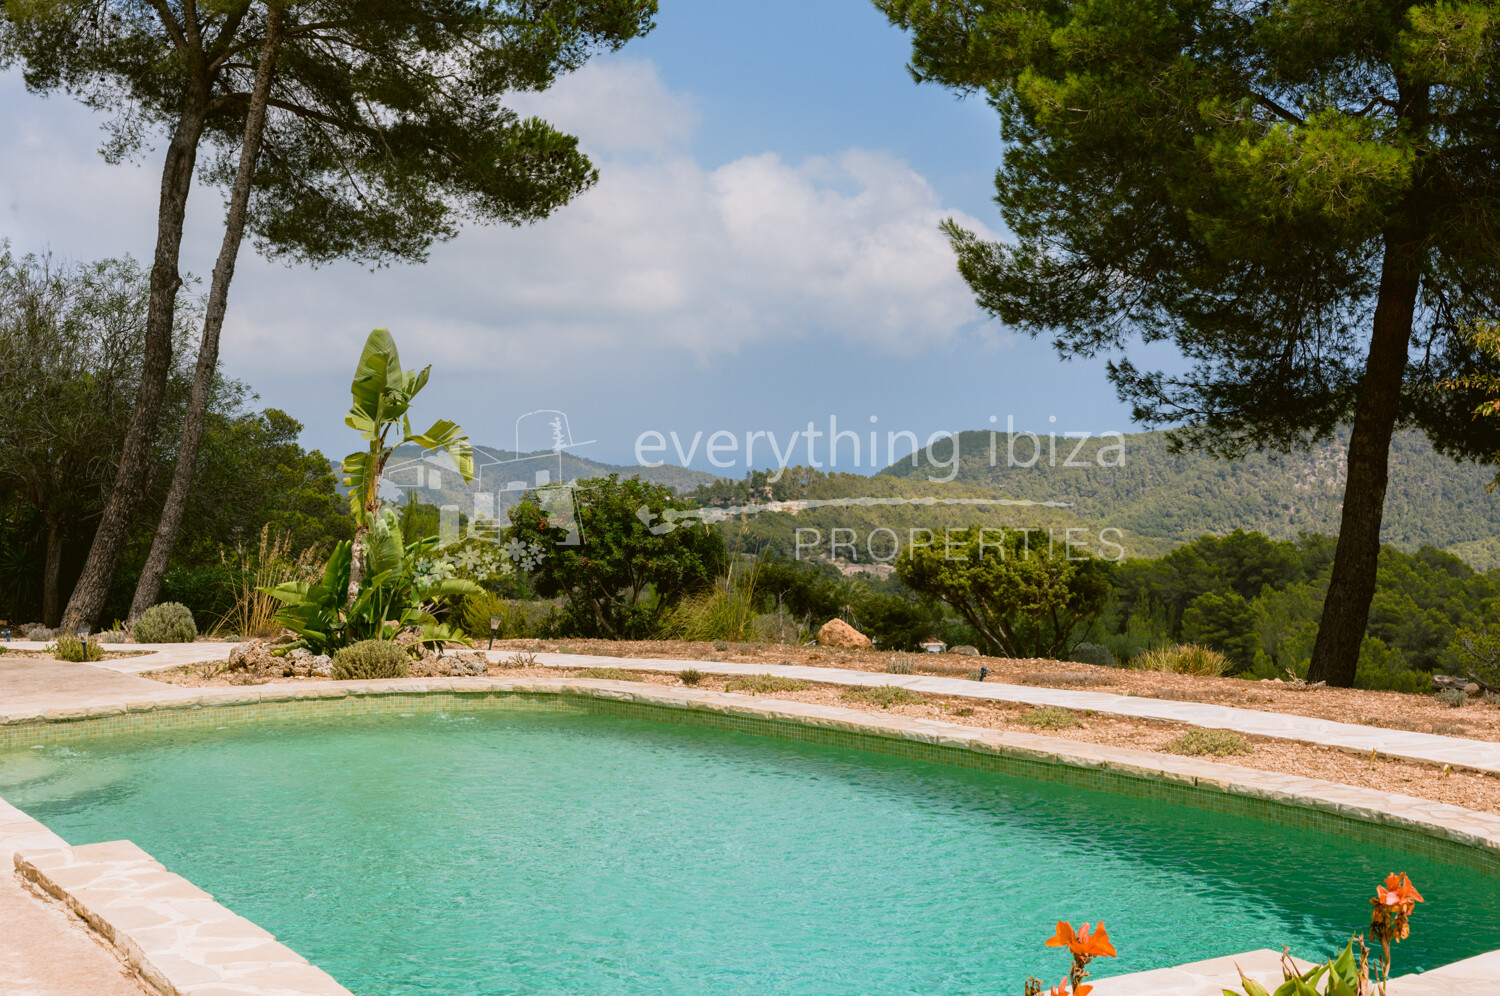 Traditional Finca with Pool and Large Private Plot Close to Stunning North Eastern Beaches, ref.1671, for sale in Ibiza by everything ibiza Properties